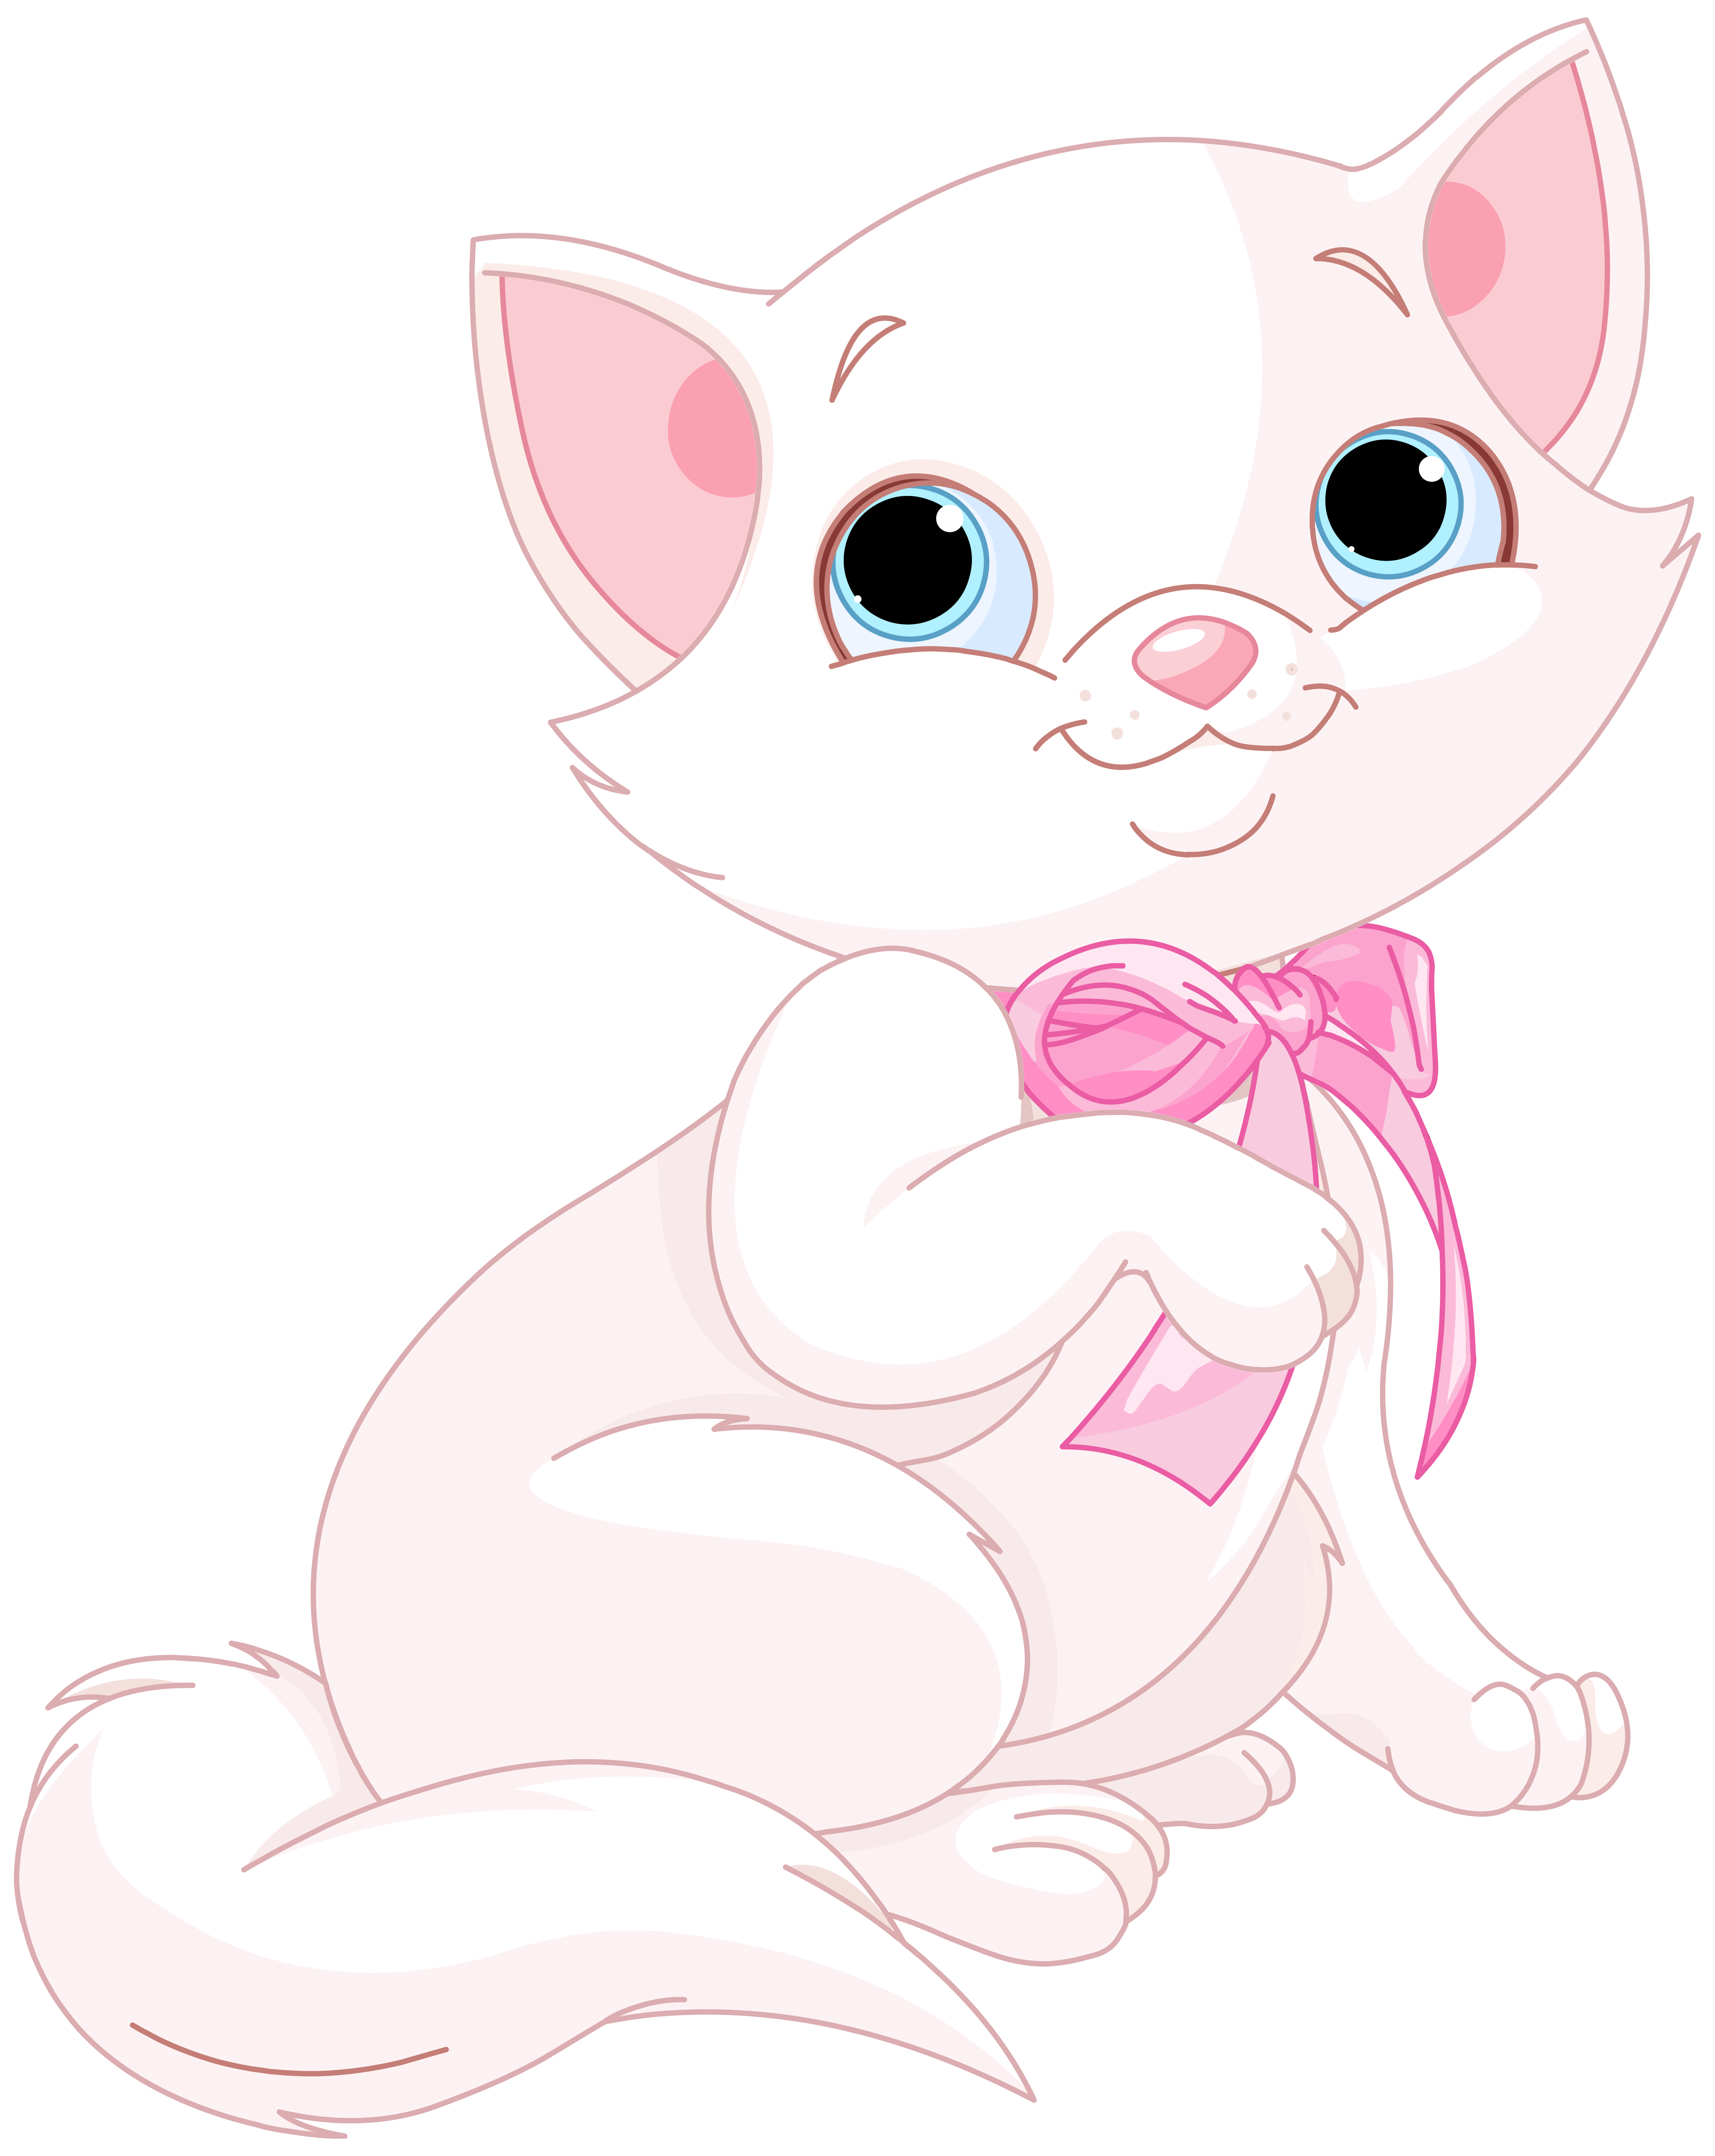 Cute Pink and White Cat PNG Clipart Image | Gallery ...